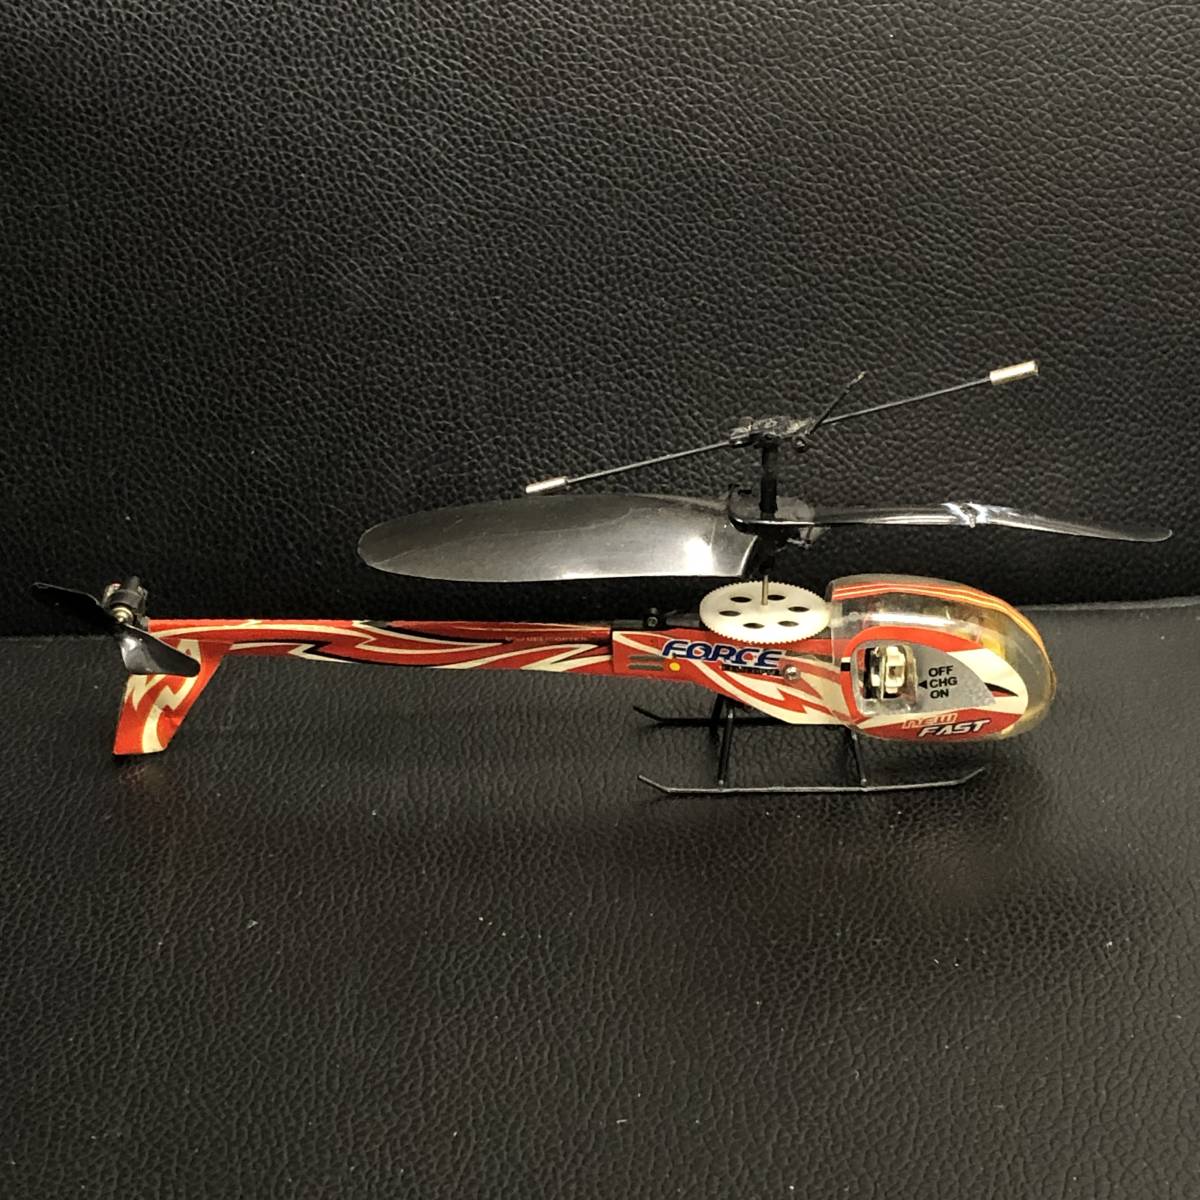 { operation goods } pocket helicopter Pocket HELICOPTER 360° Turn super miniature toy toy repair traces equipped with defect used 